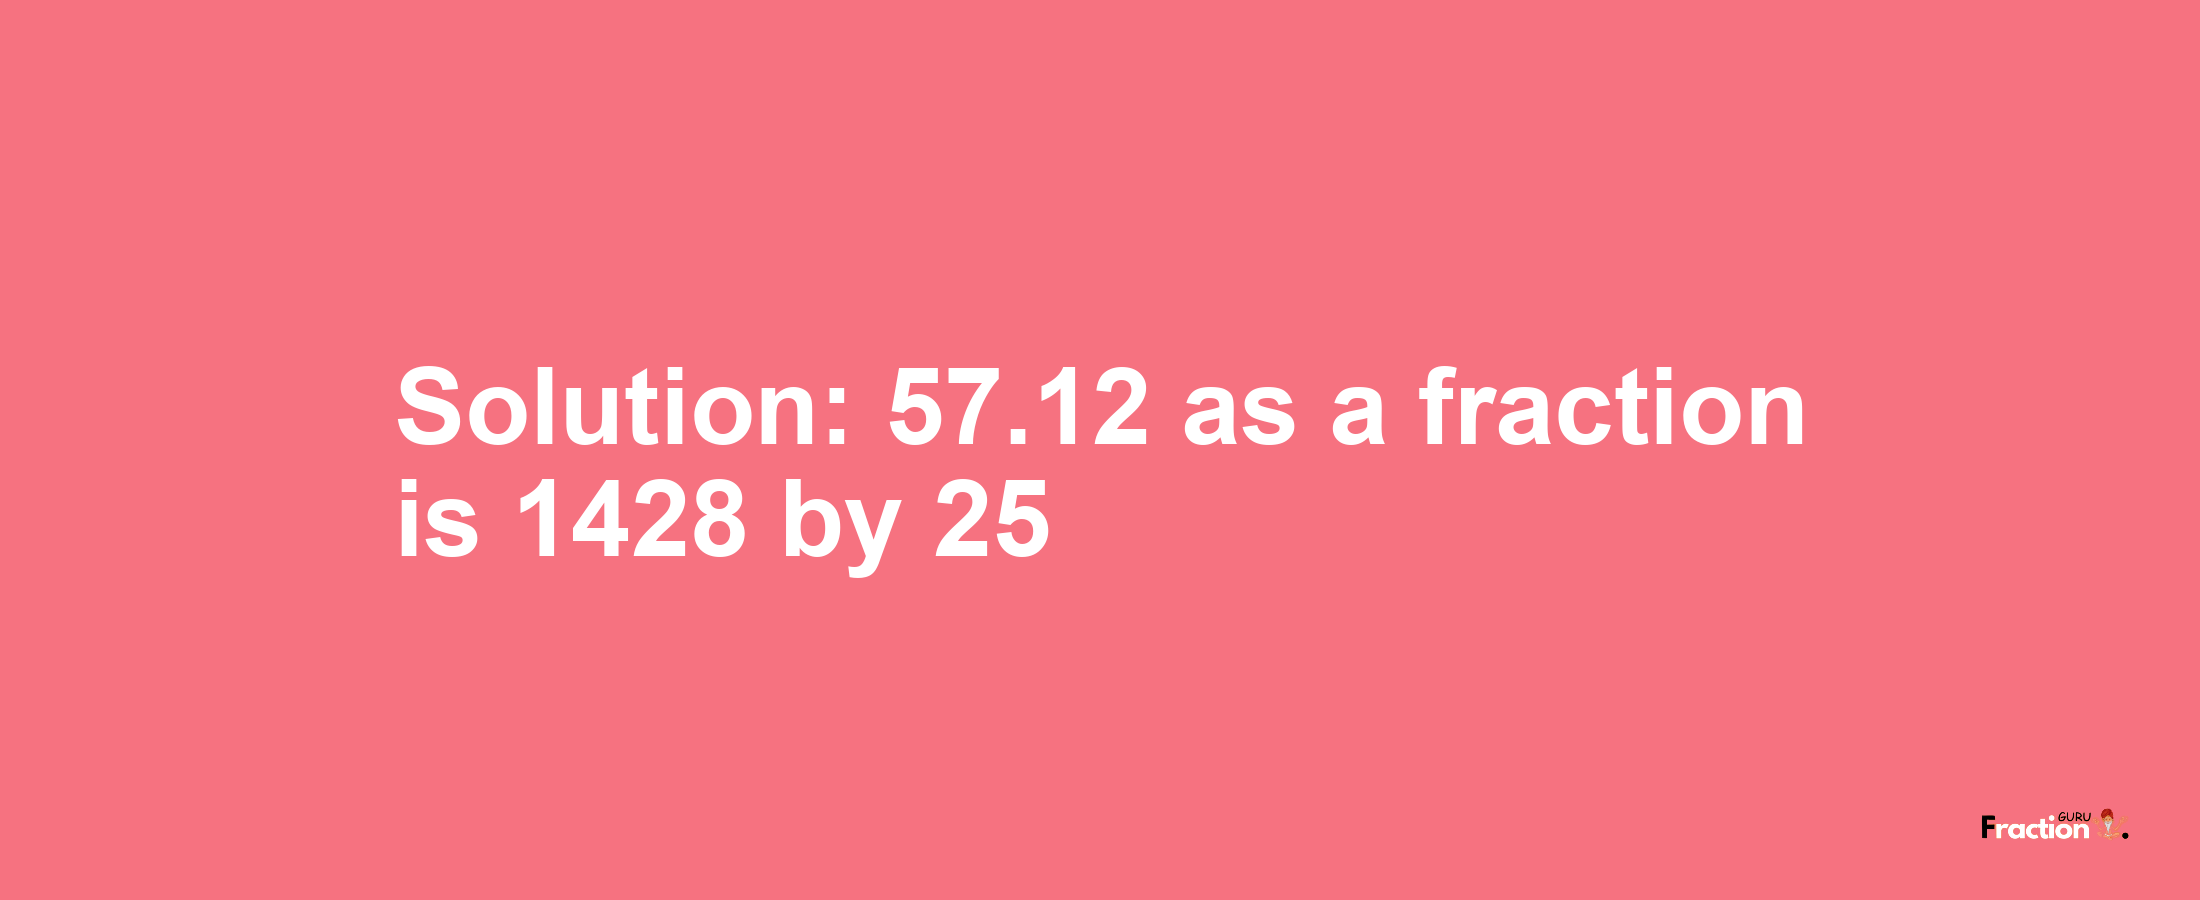 Solution:57.12 as a fraction is 1428/25